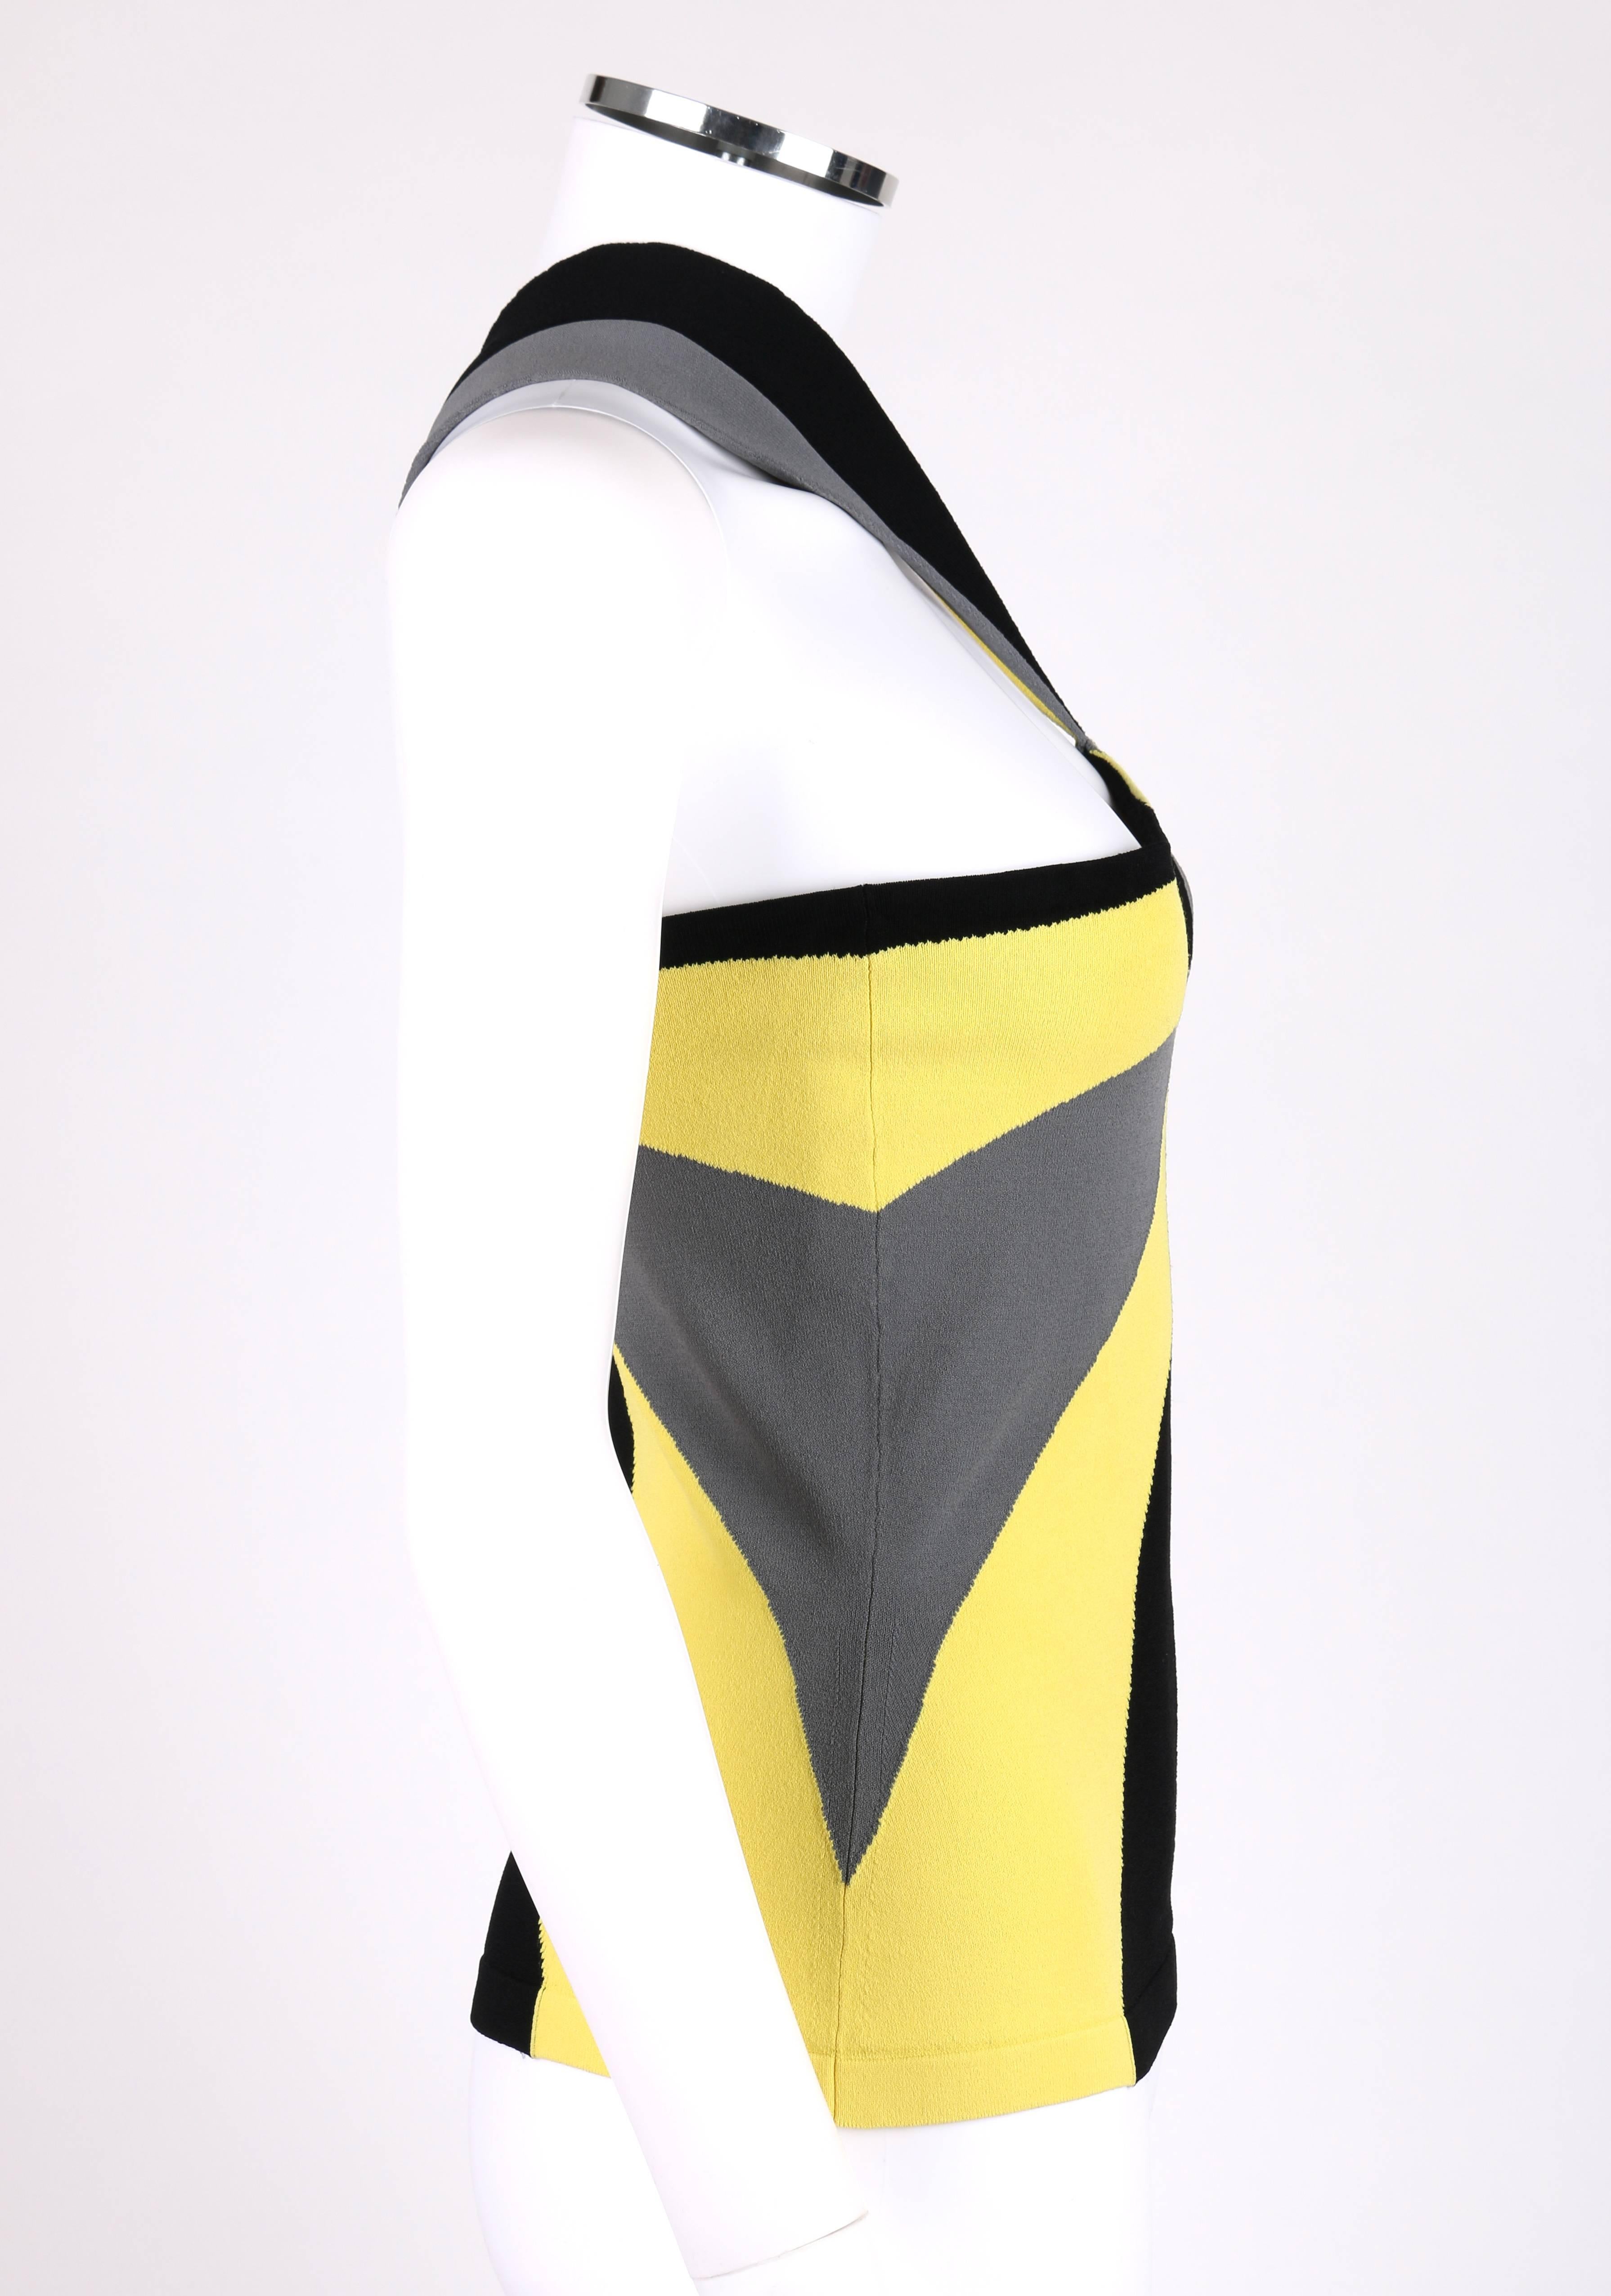 Alexander McQueen Resort 2010 knit tank top. Runway look #19. Yellow, black, and gray starbust op art pattern. Sleeveless. Two stylistic halter style straps. Marked Fabric Content: 